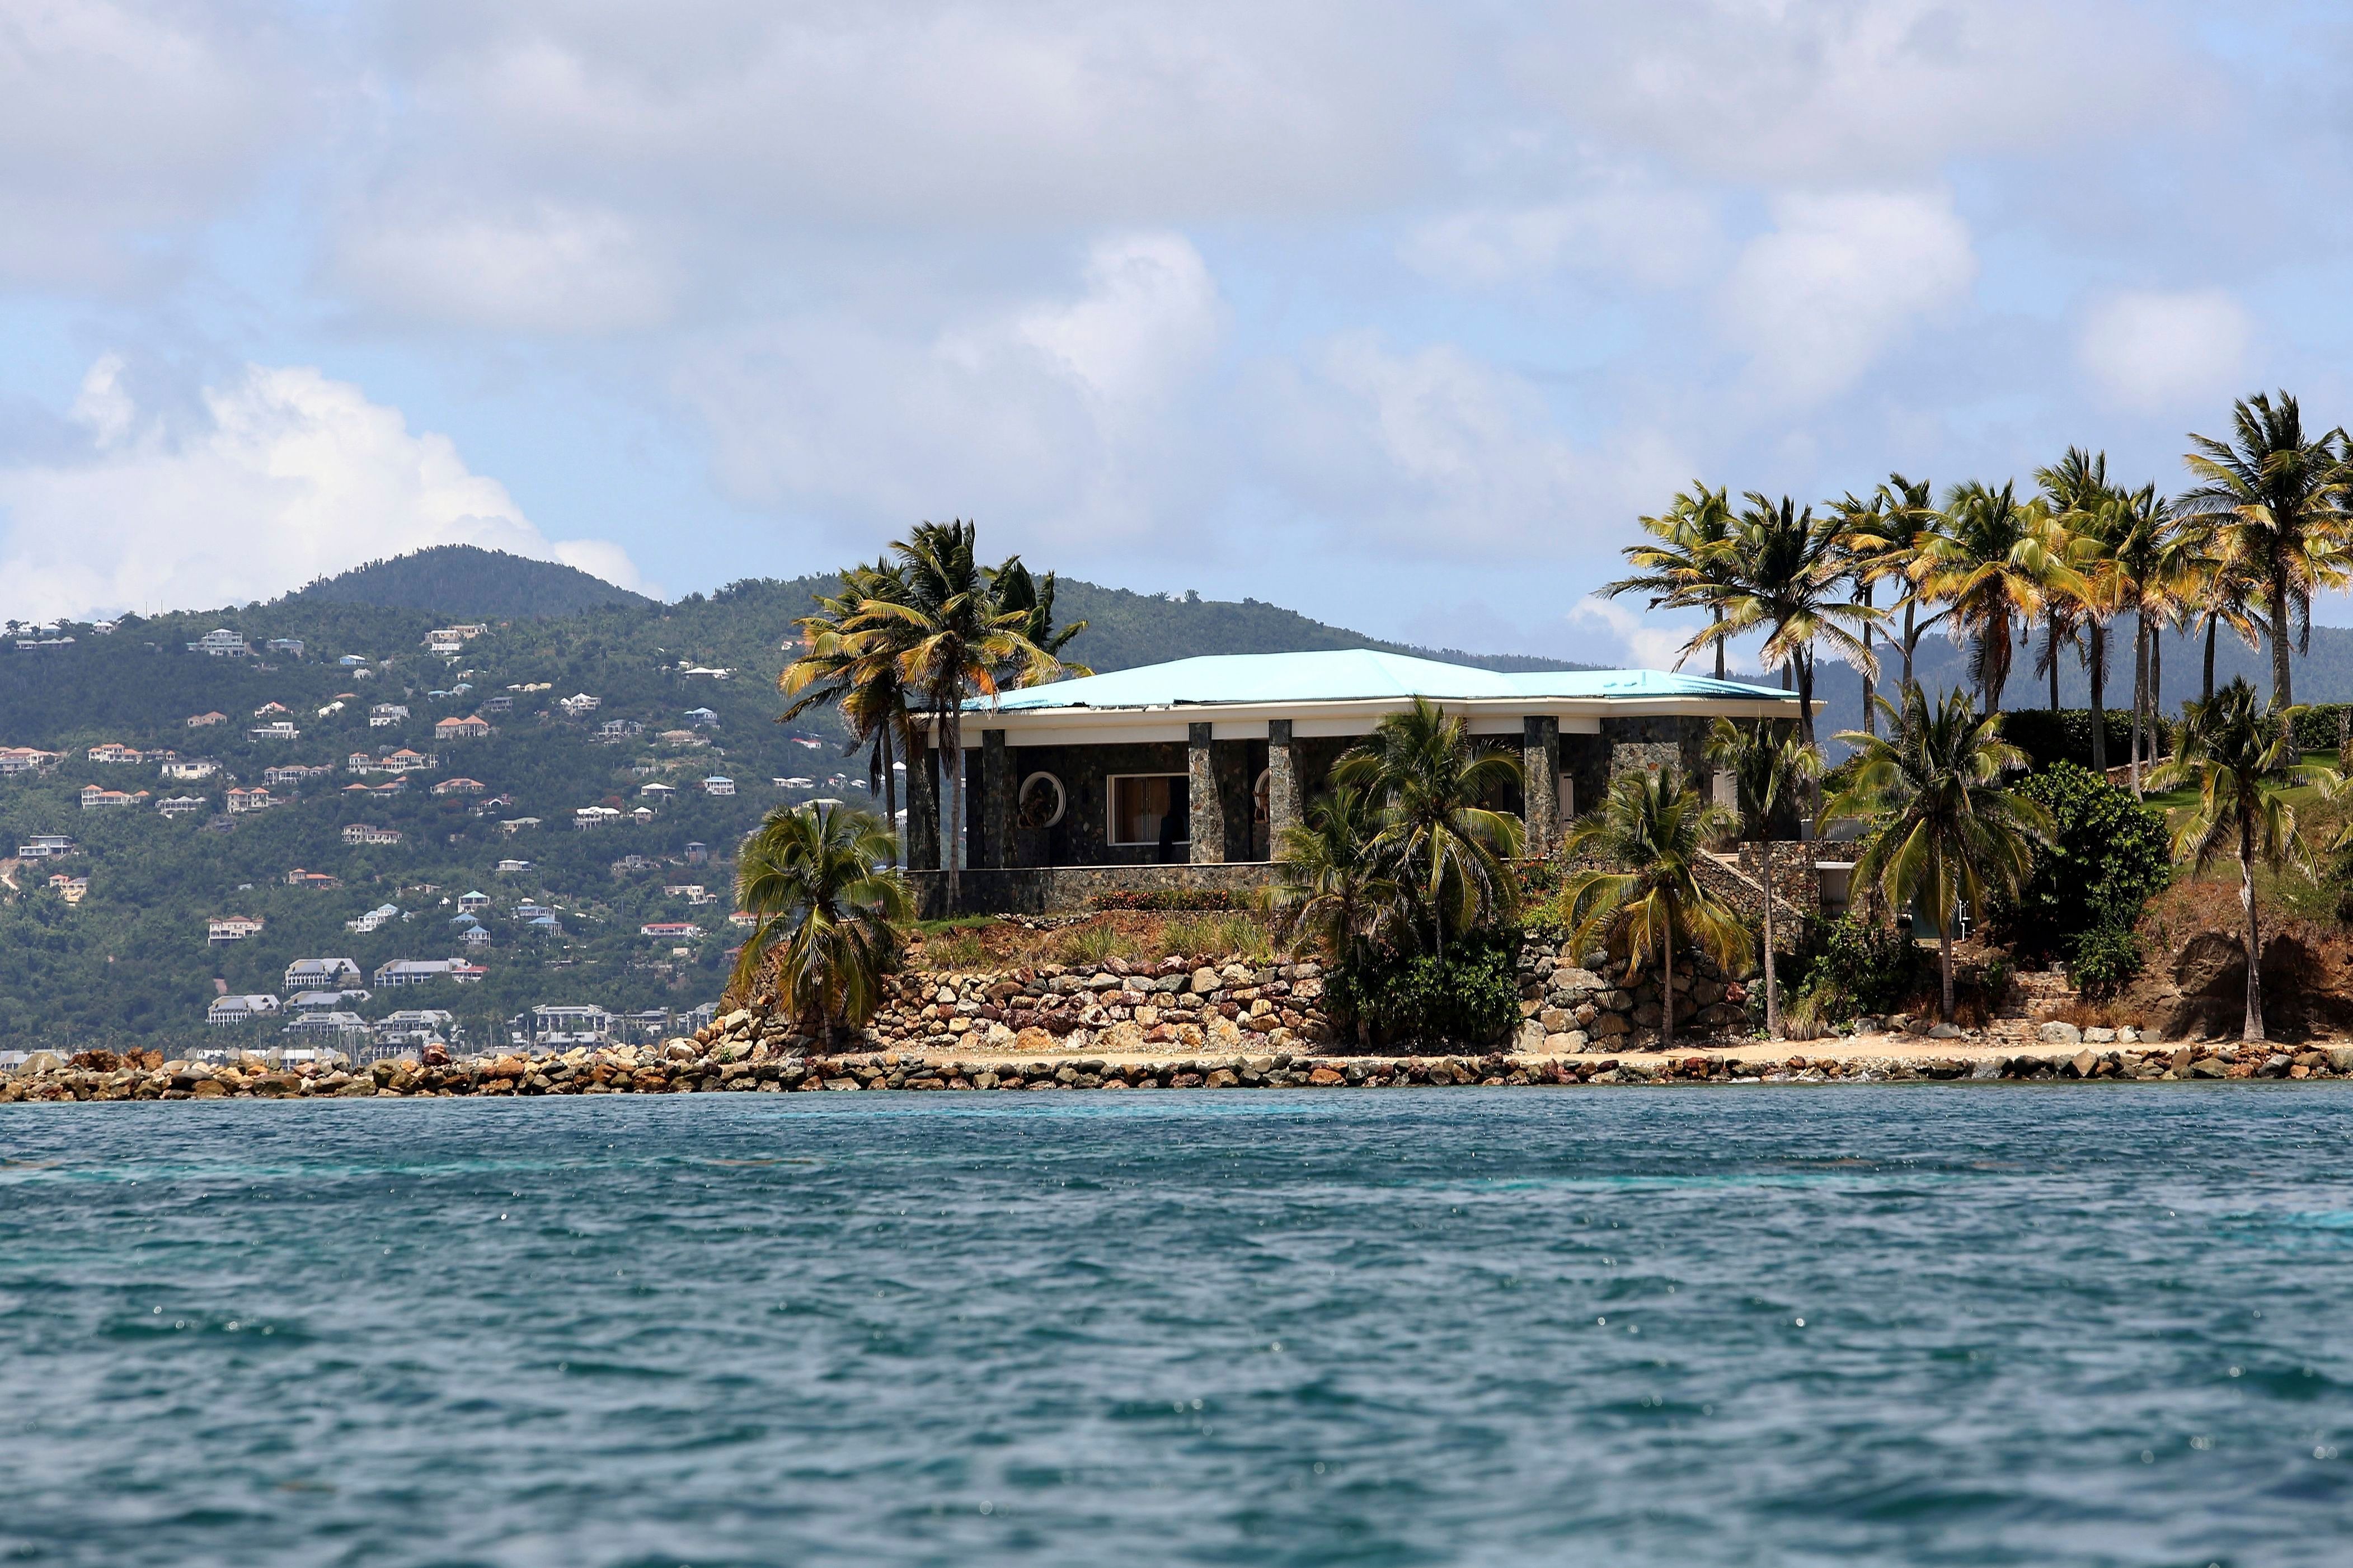 Where Is Epstein Island? What To Know About Little Saint James